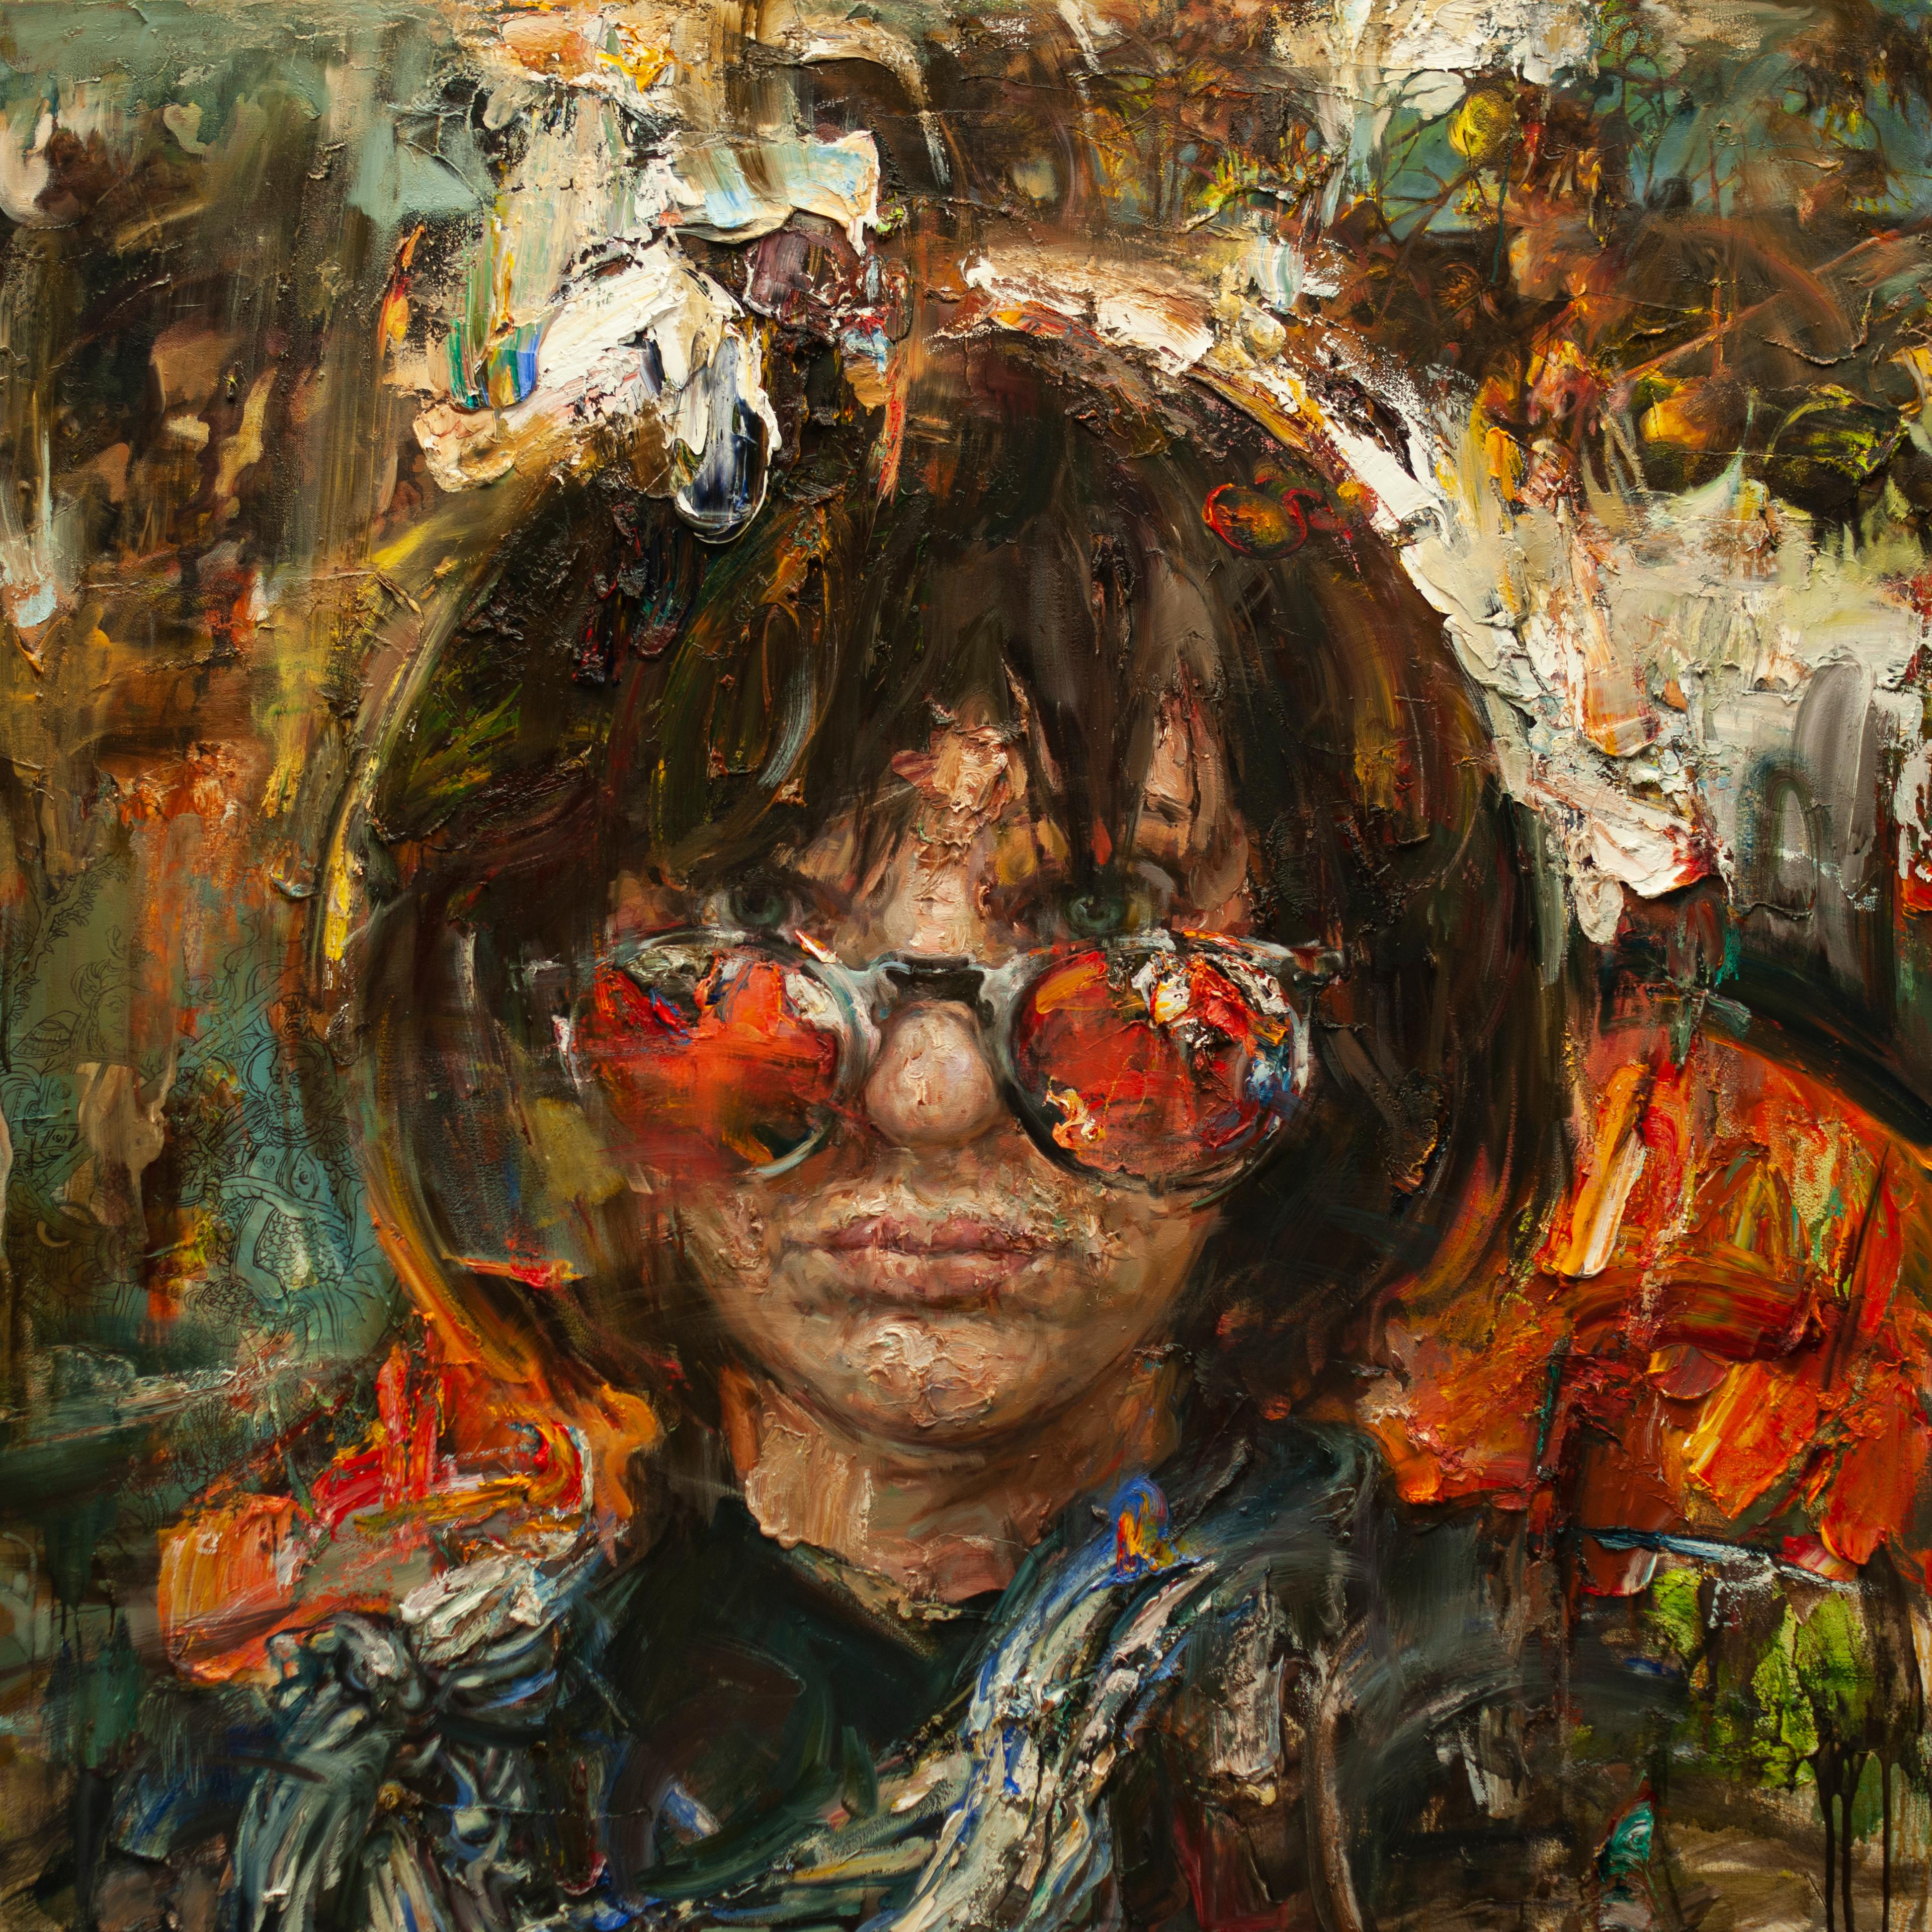 "Sunglasses", Contemporary, Figurative, Portrait, Oil Paint, Canvas, Abstracted - Painting by Victor Wang